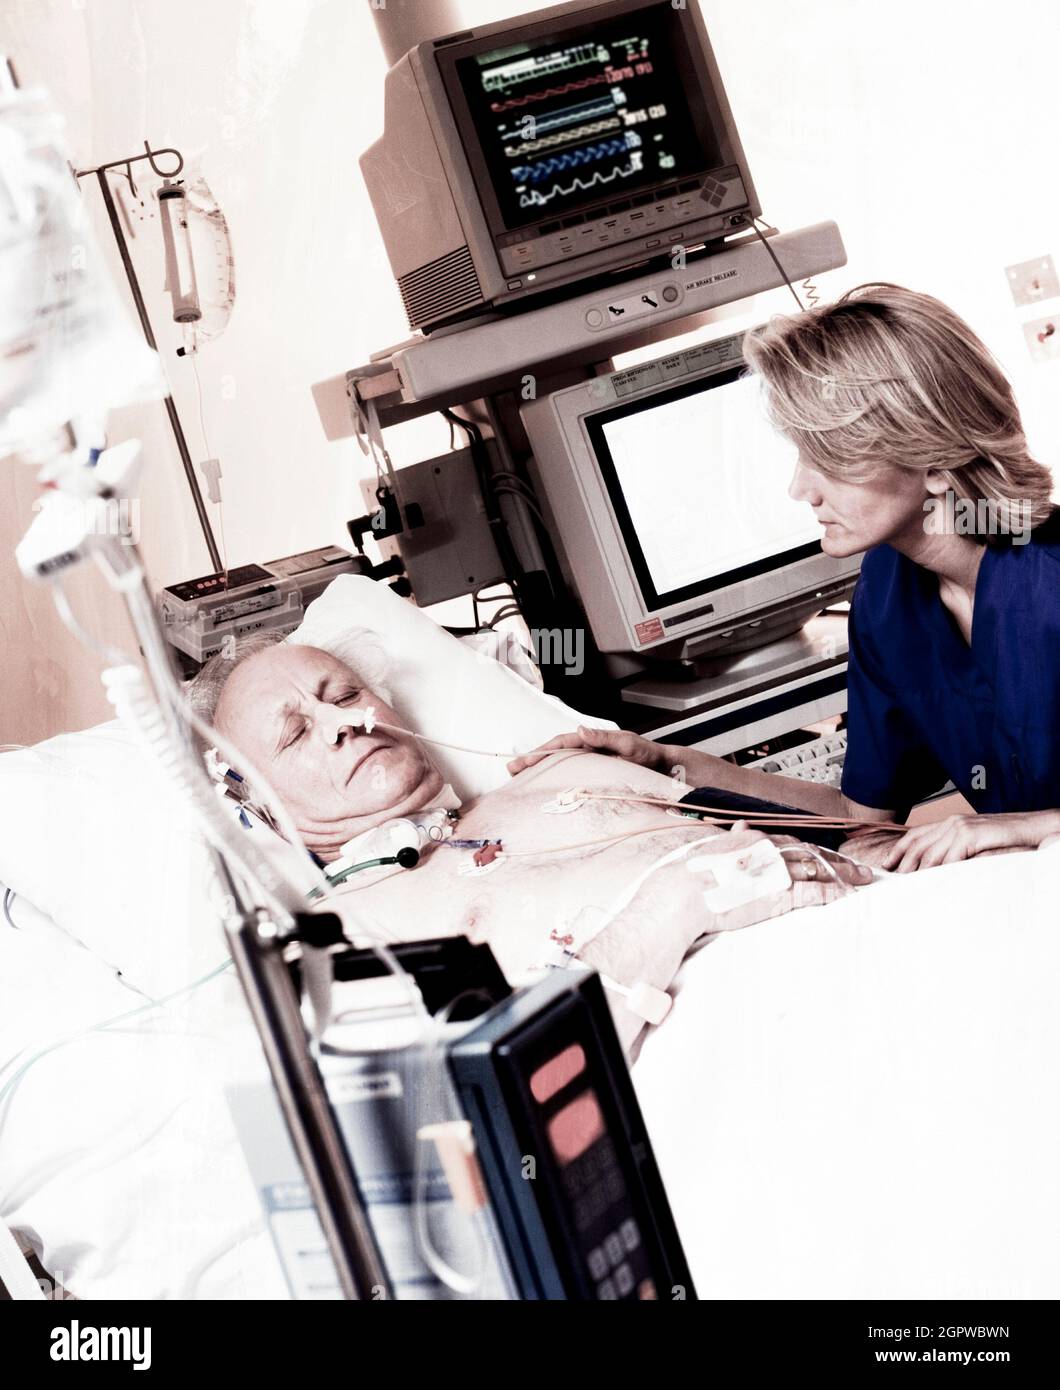 Patient in Intensive Care Unit (simulation) Stock Photo